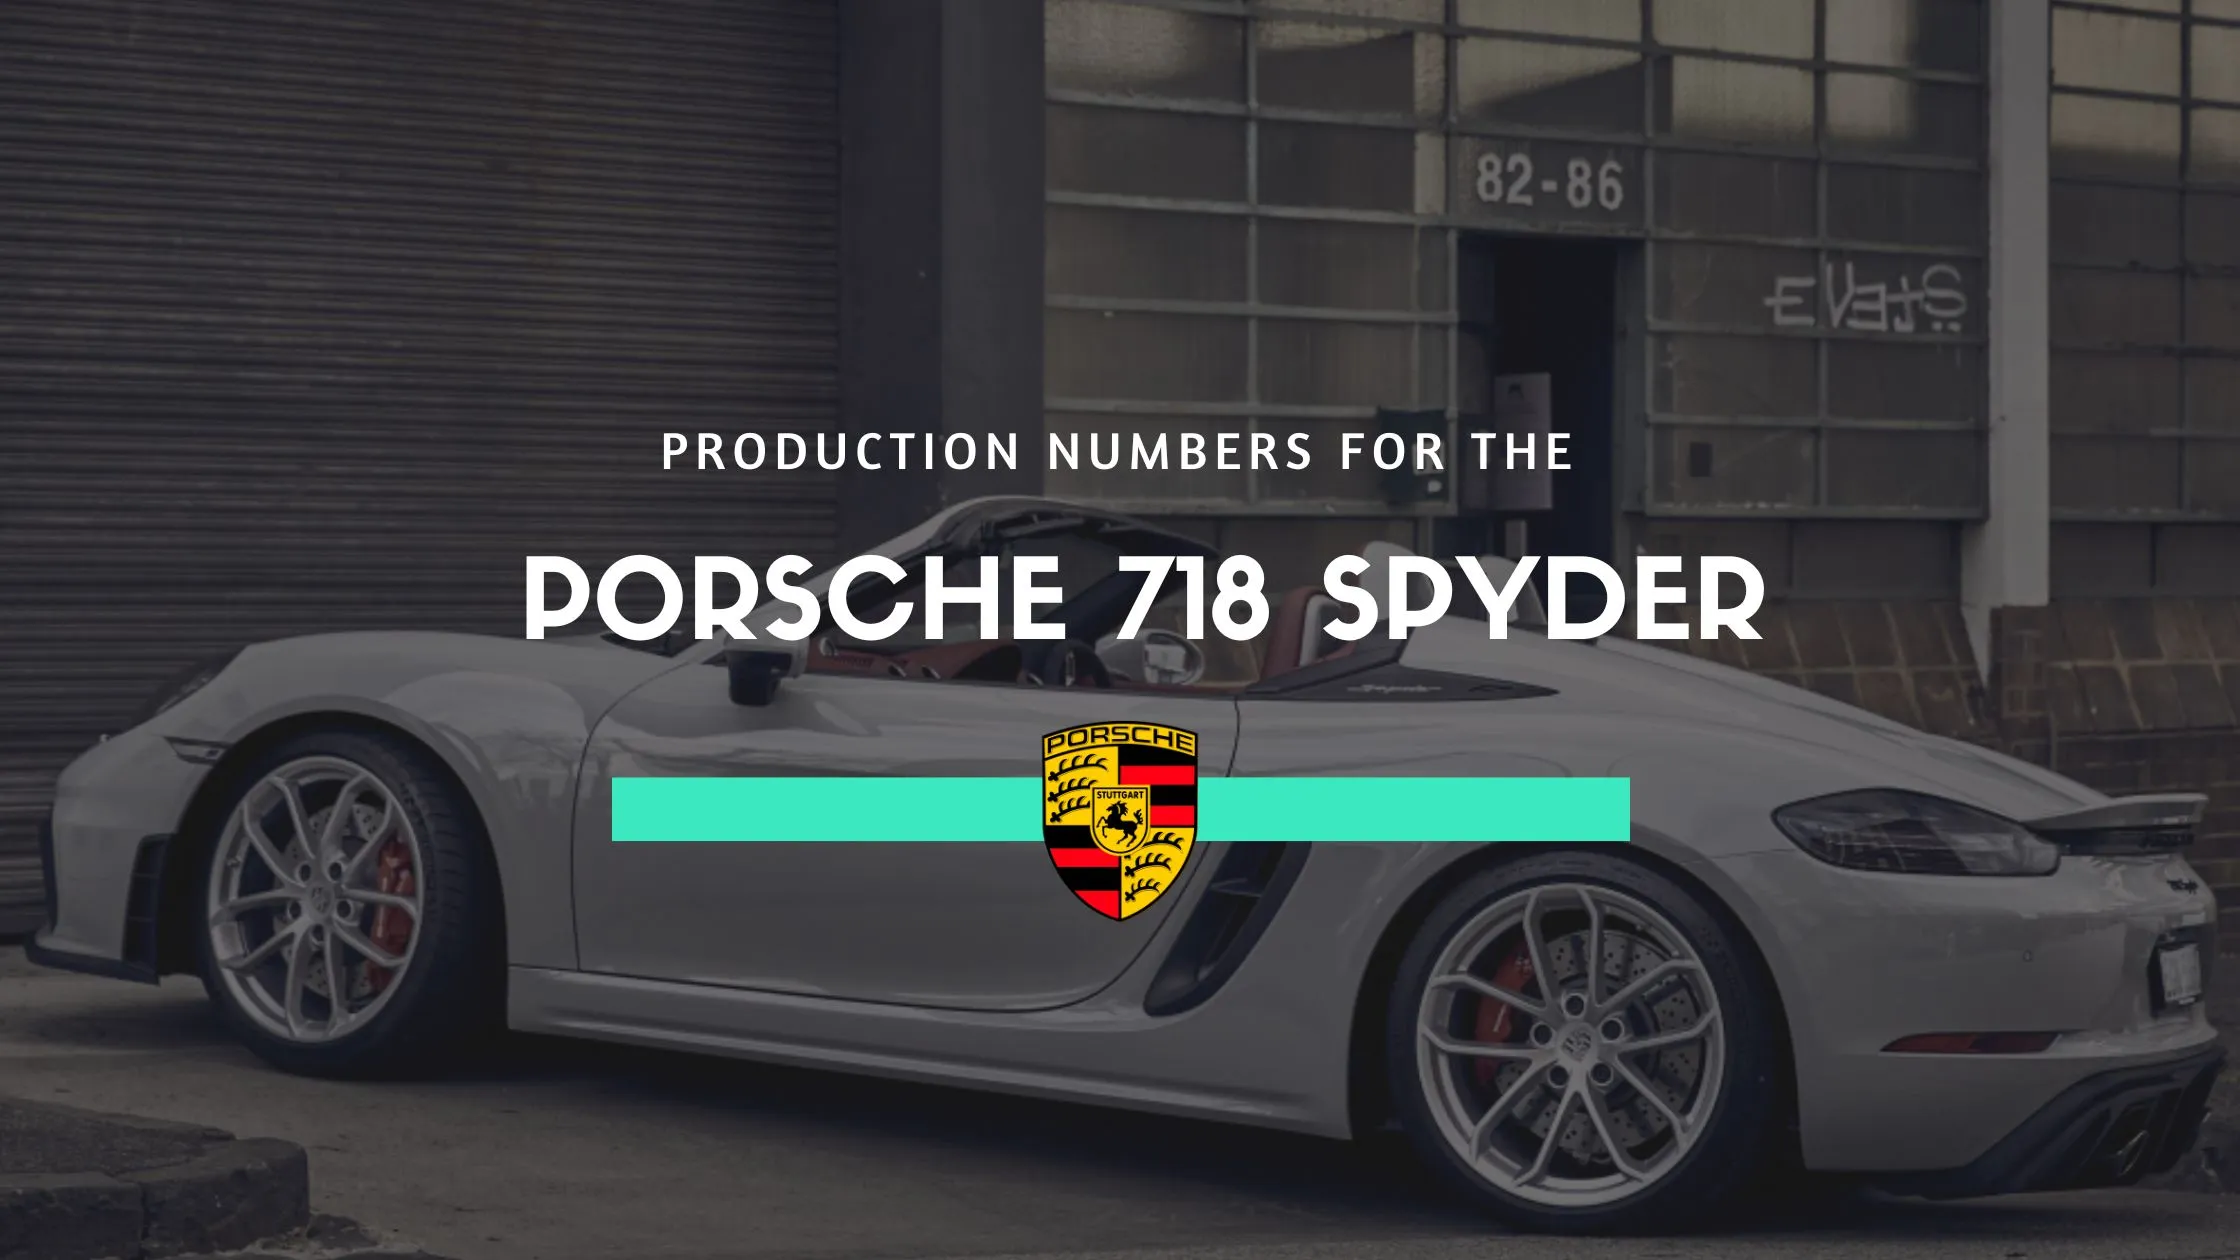 718 spyder production numbers